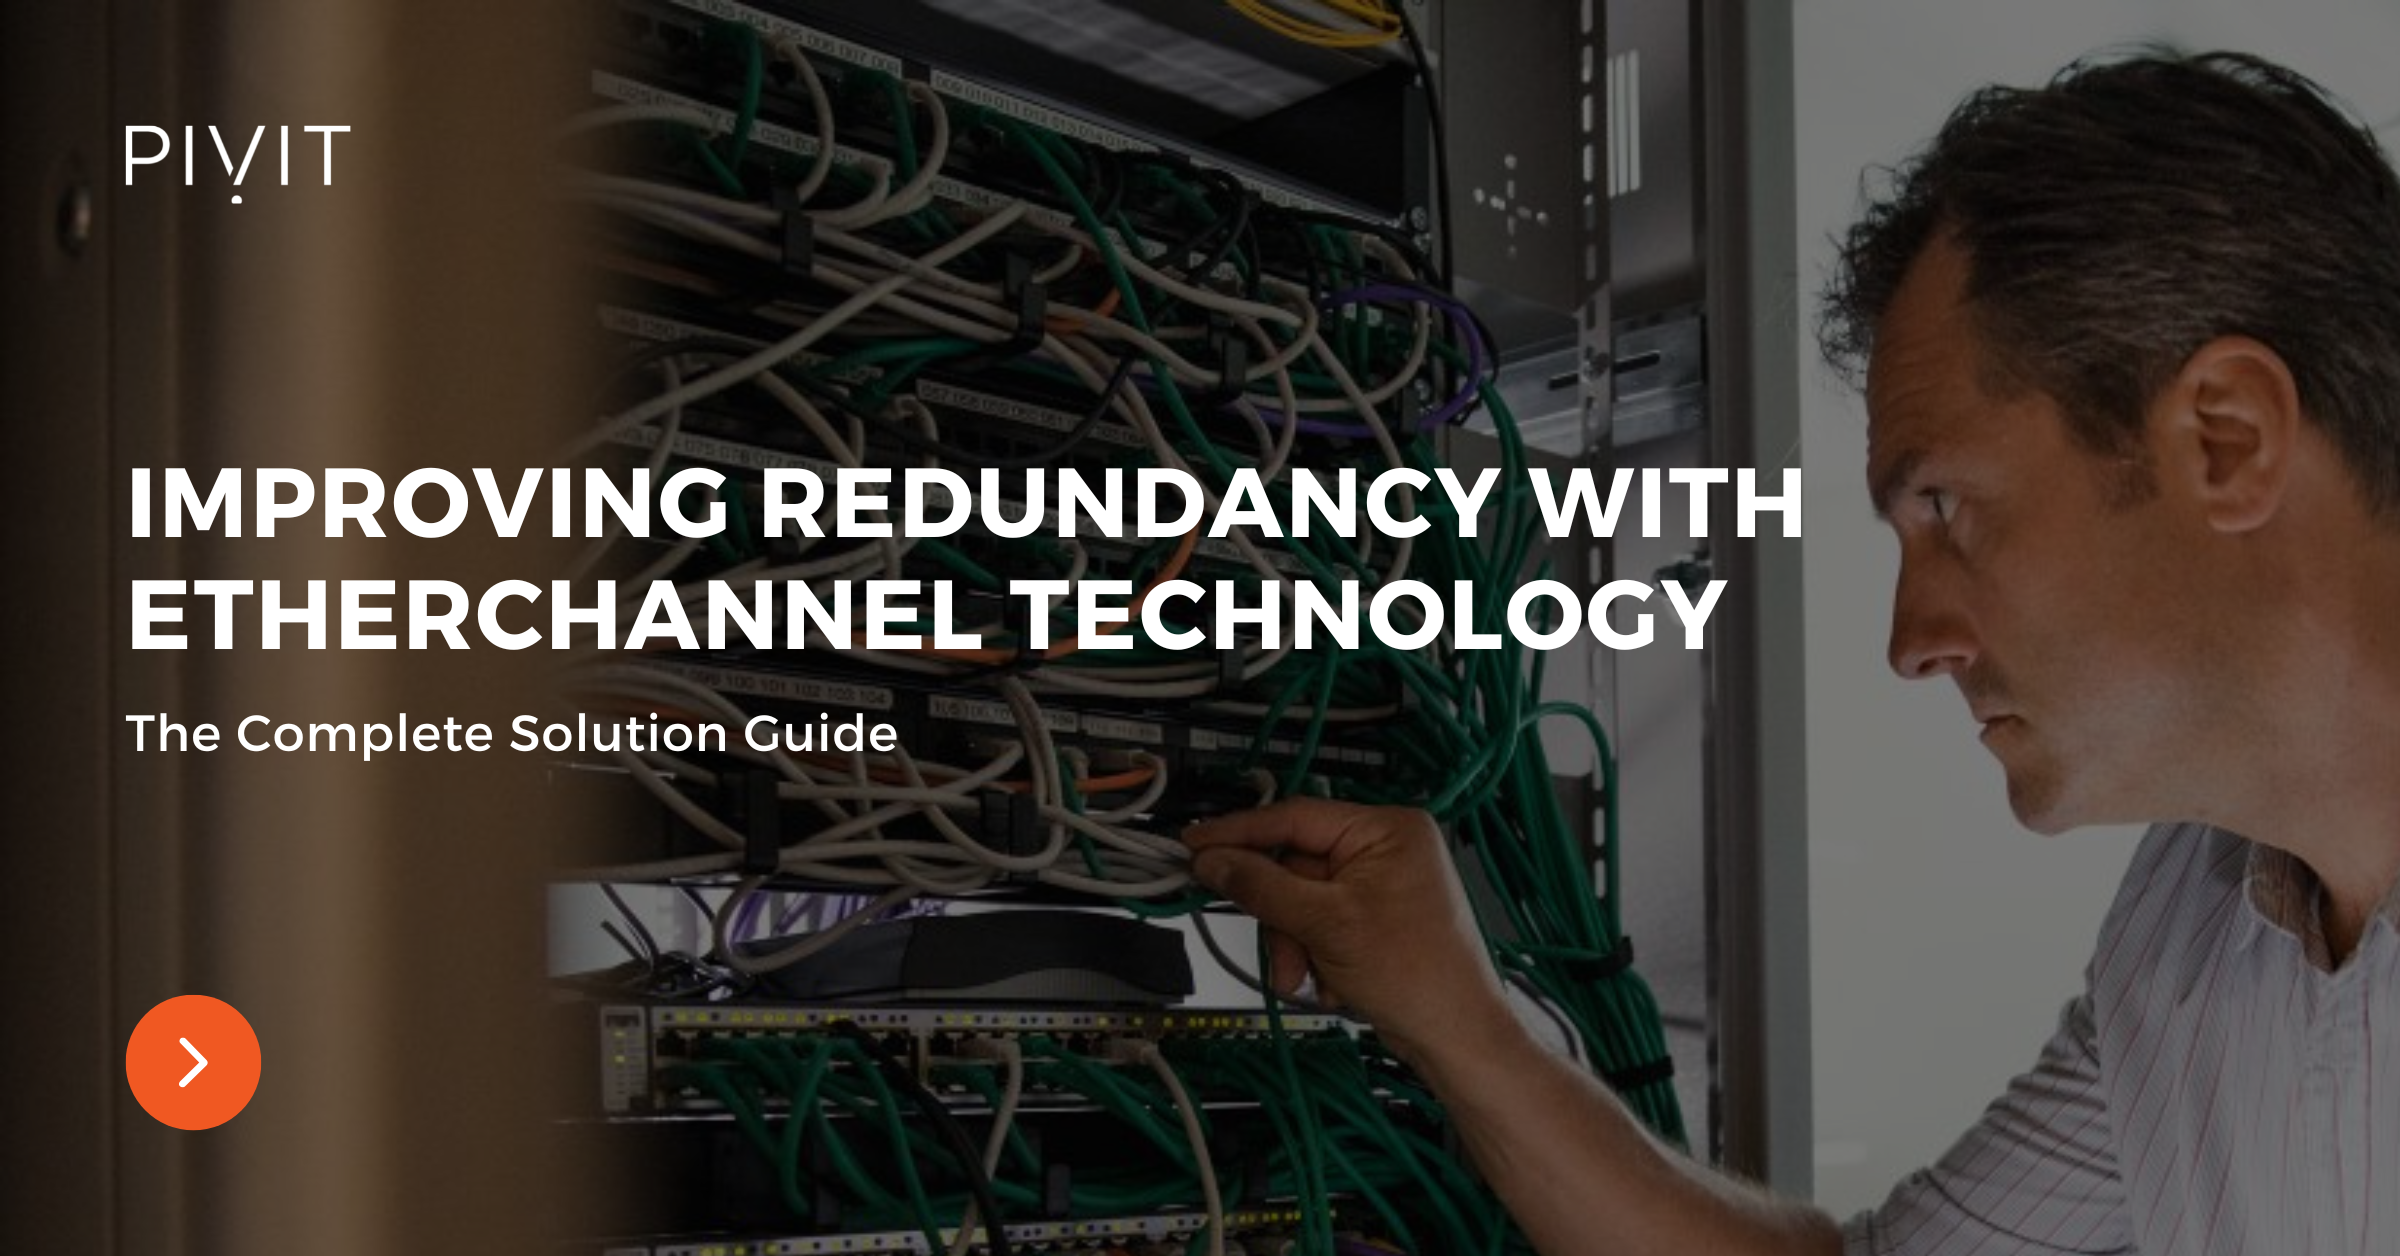 A Complete Guide To Improving Redundancy with EtherChannel Technology